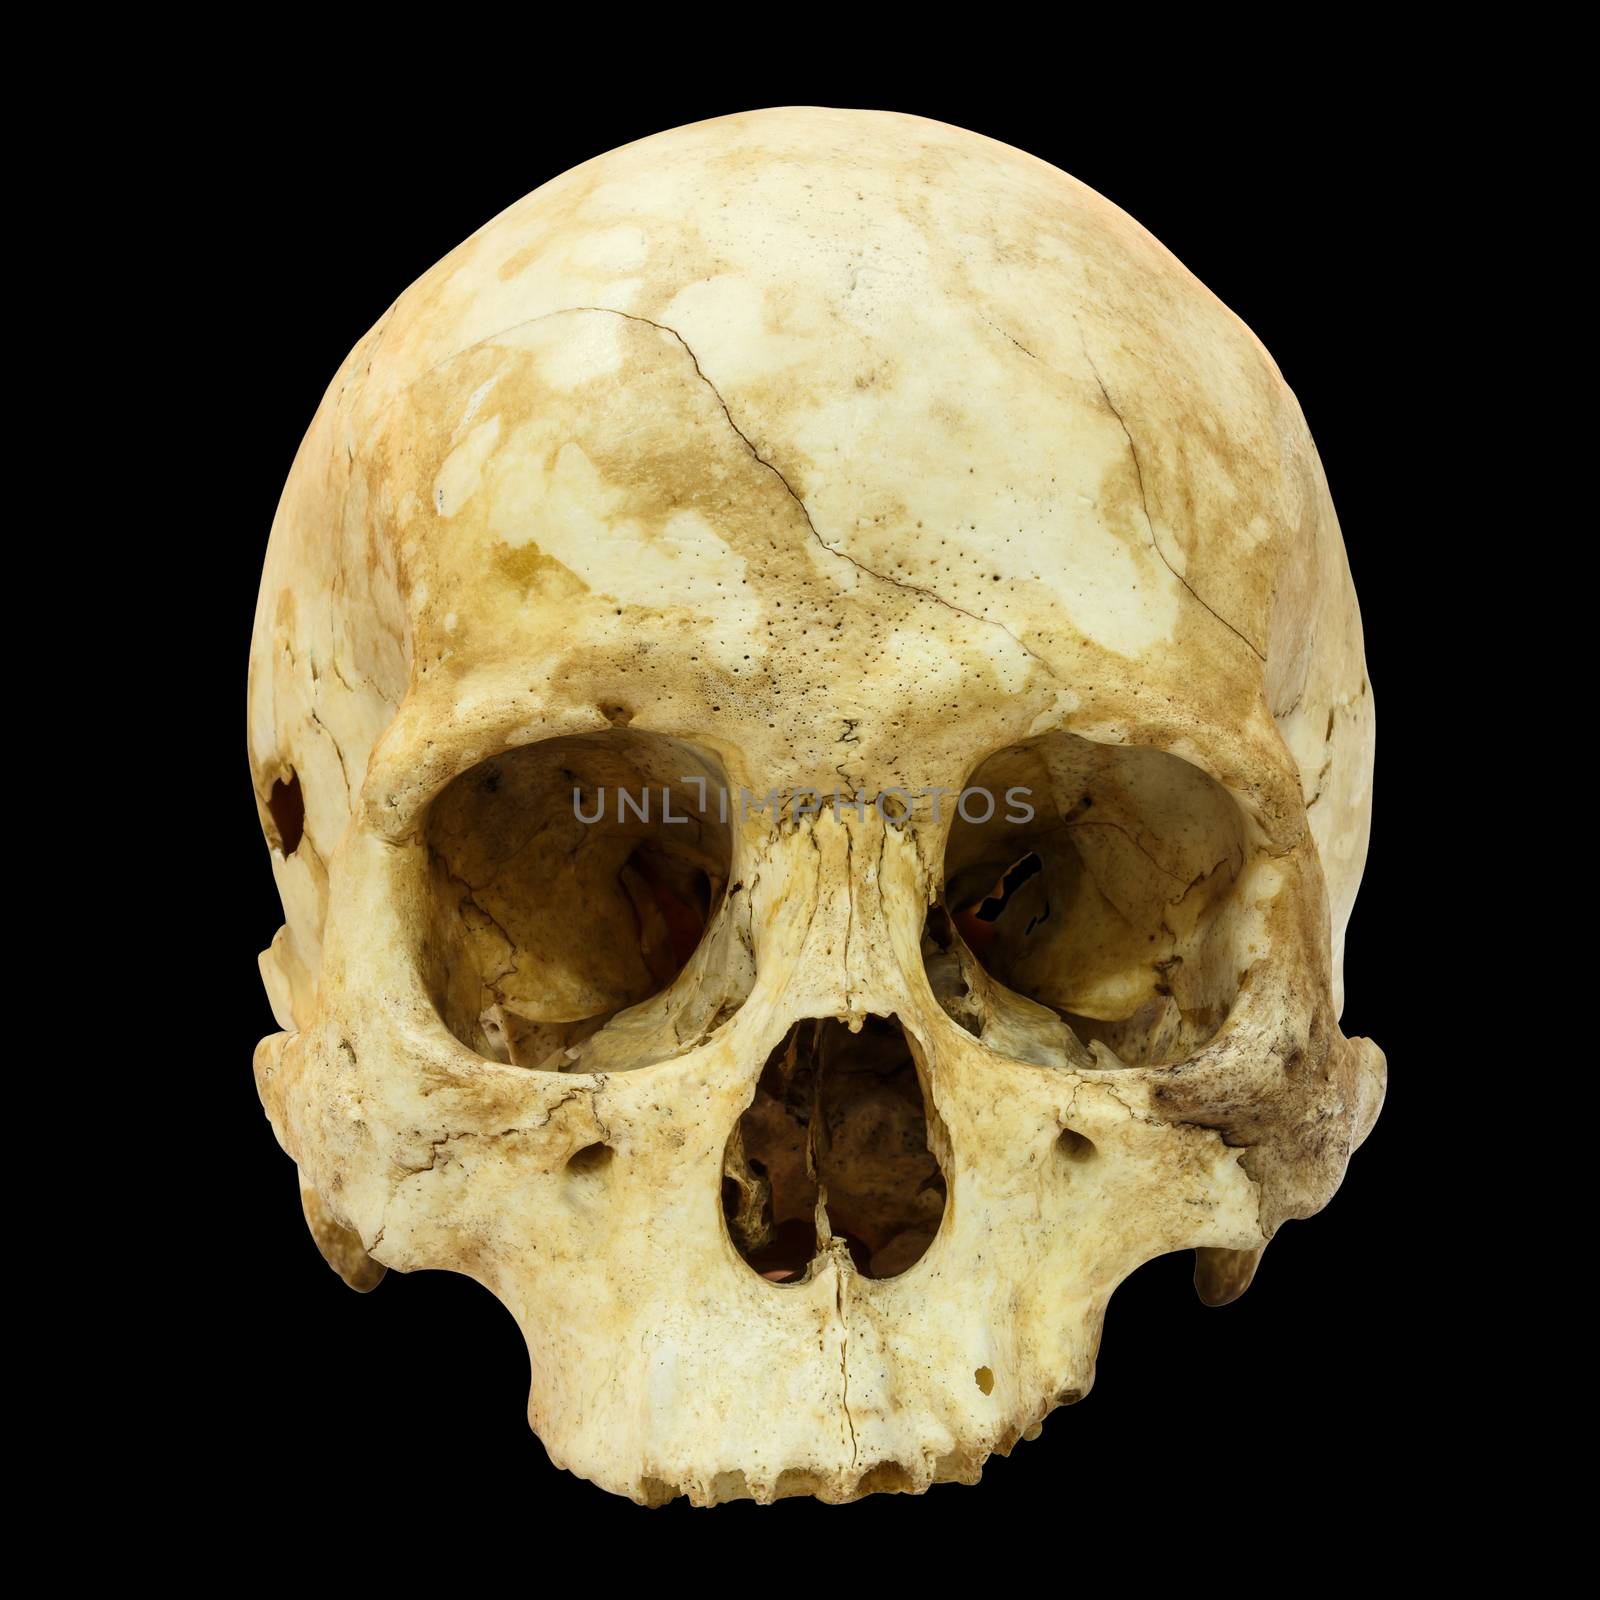 Human Skull Fracture (Mongoloid,Asian) on isolated background